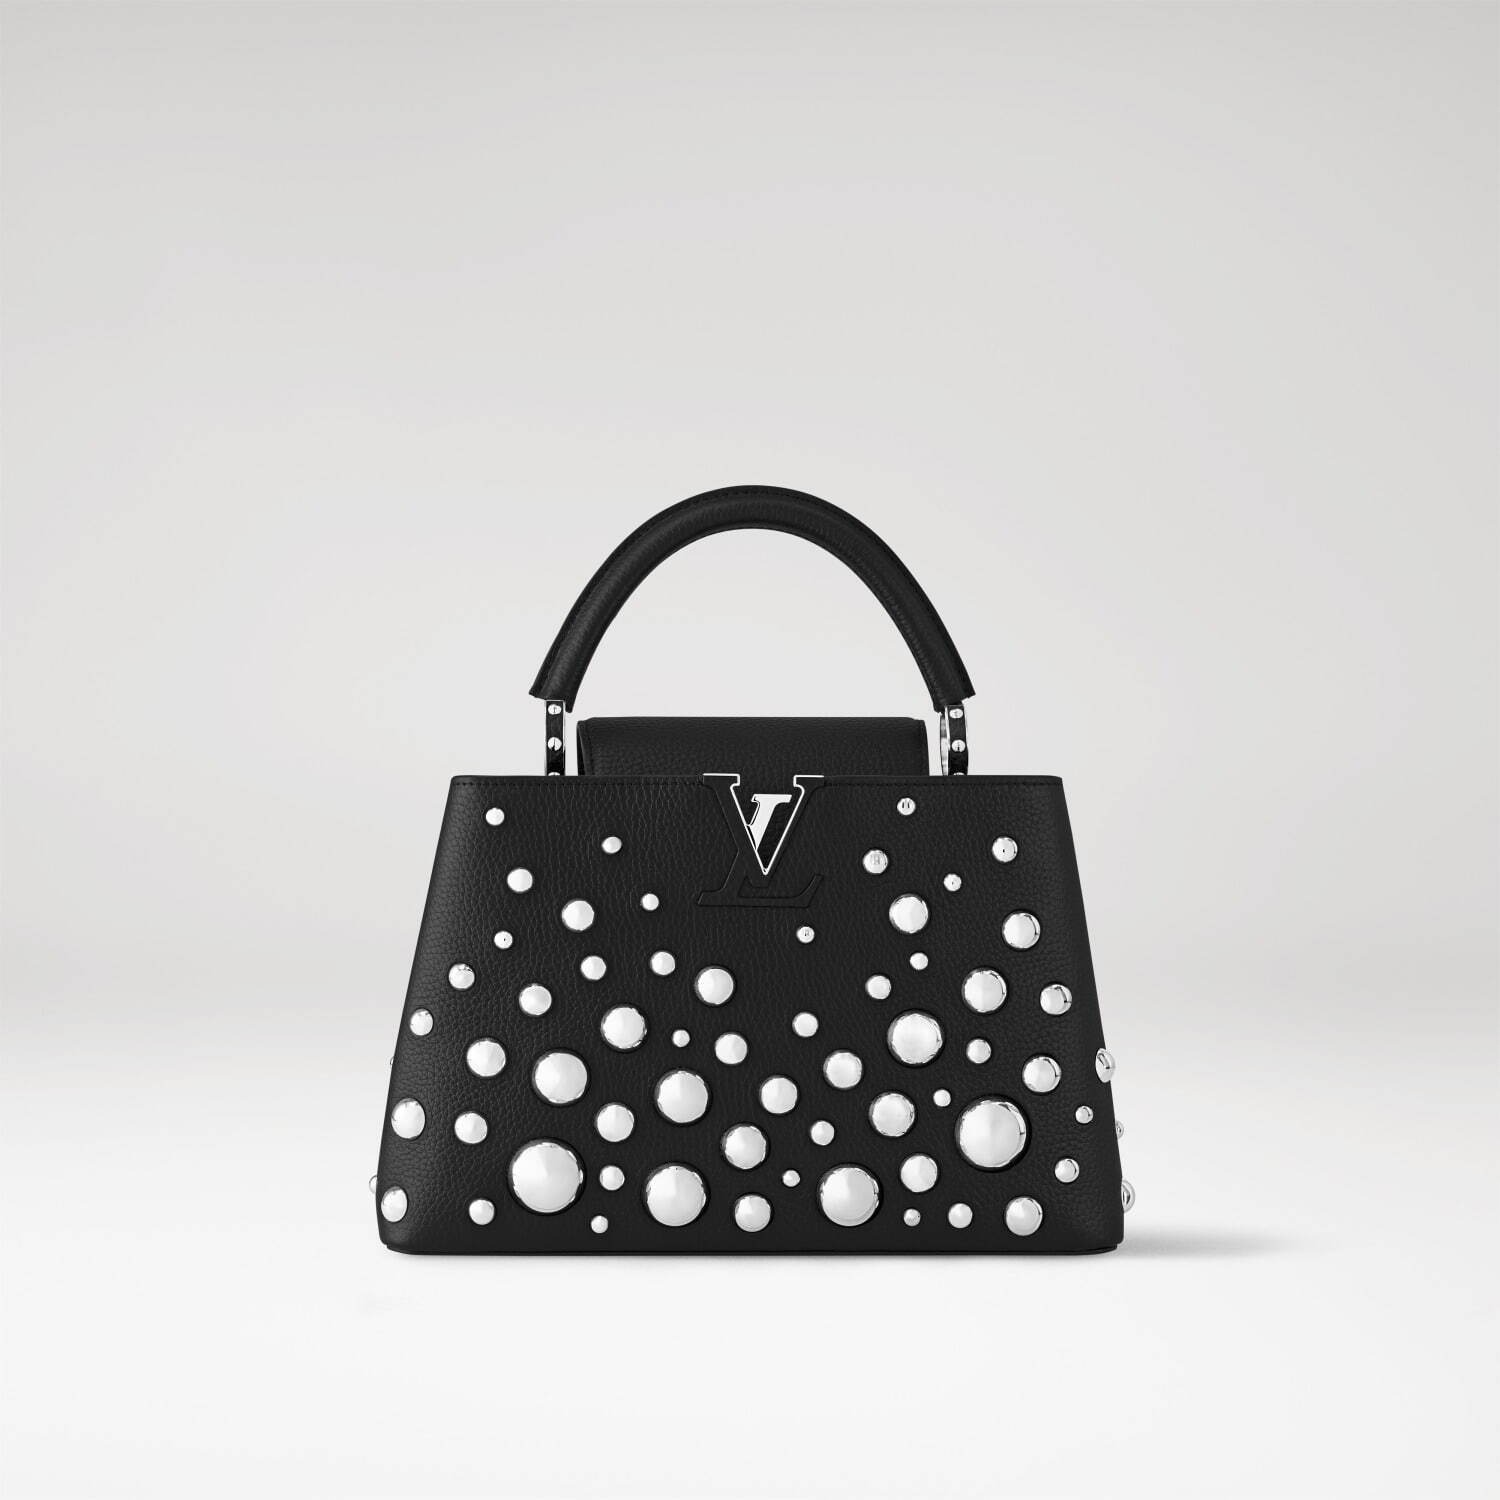 Louis Vuitton - Infinite possibilities. Showcasing the new Louis Vuitton  collaboration with Yayoi Kusama, Harrods' famous facade is reimagined in  the artist's colorful Painted Dots motif. Explore #LVxYayoiKusama at